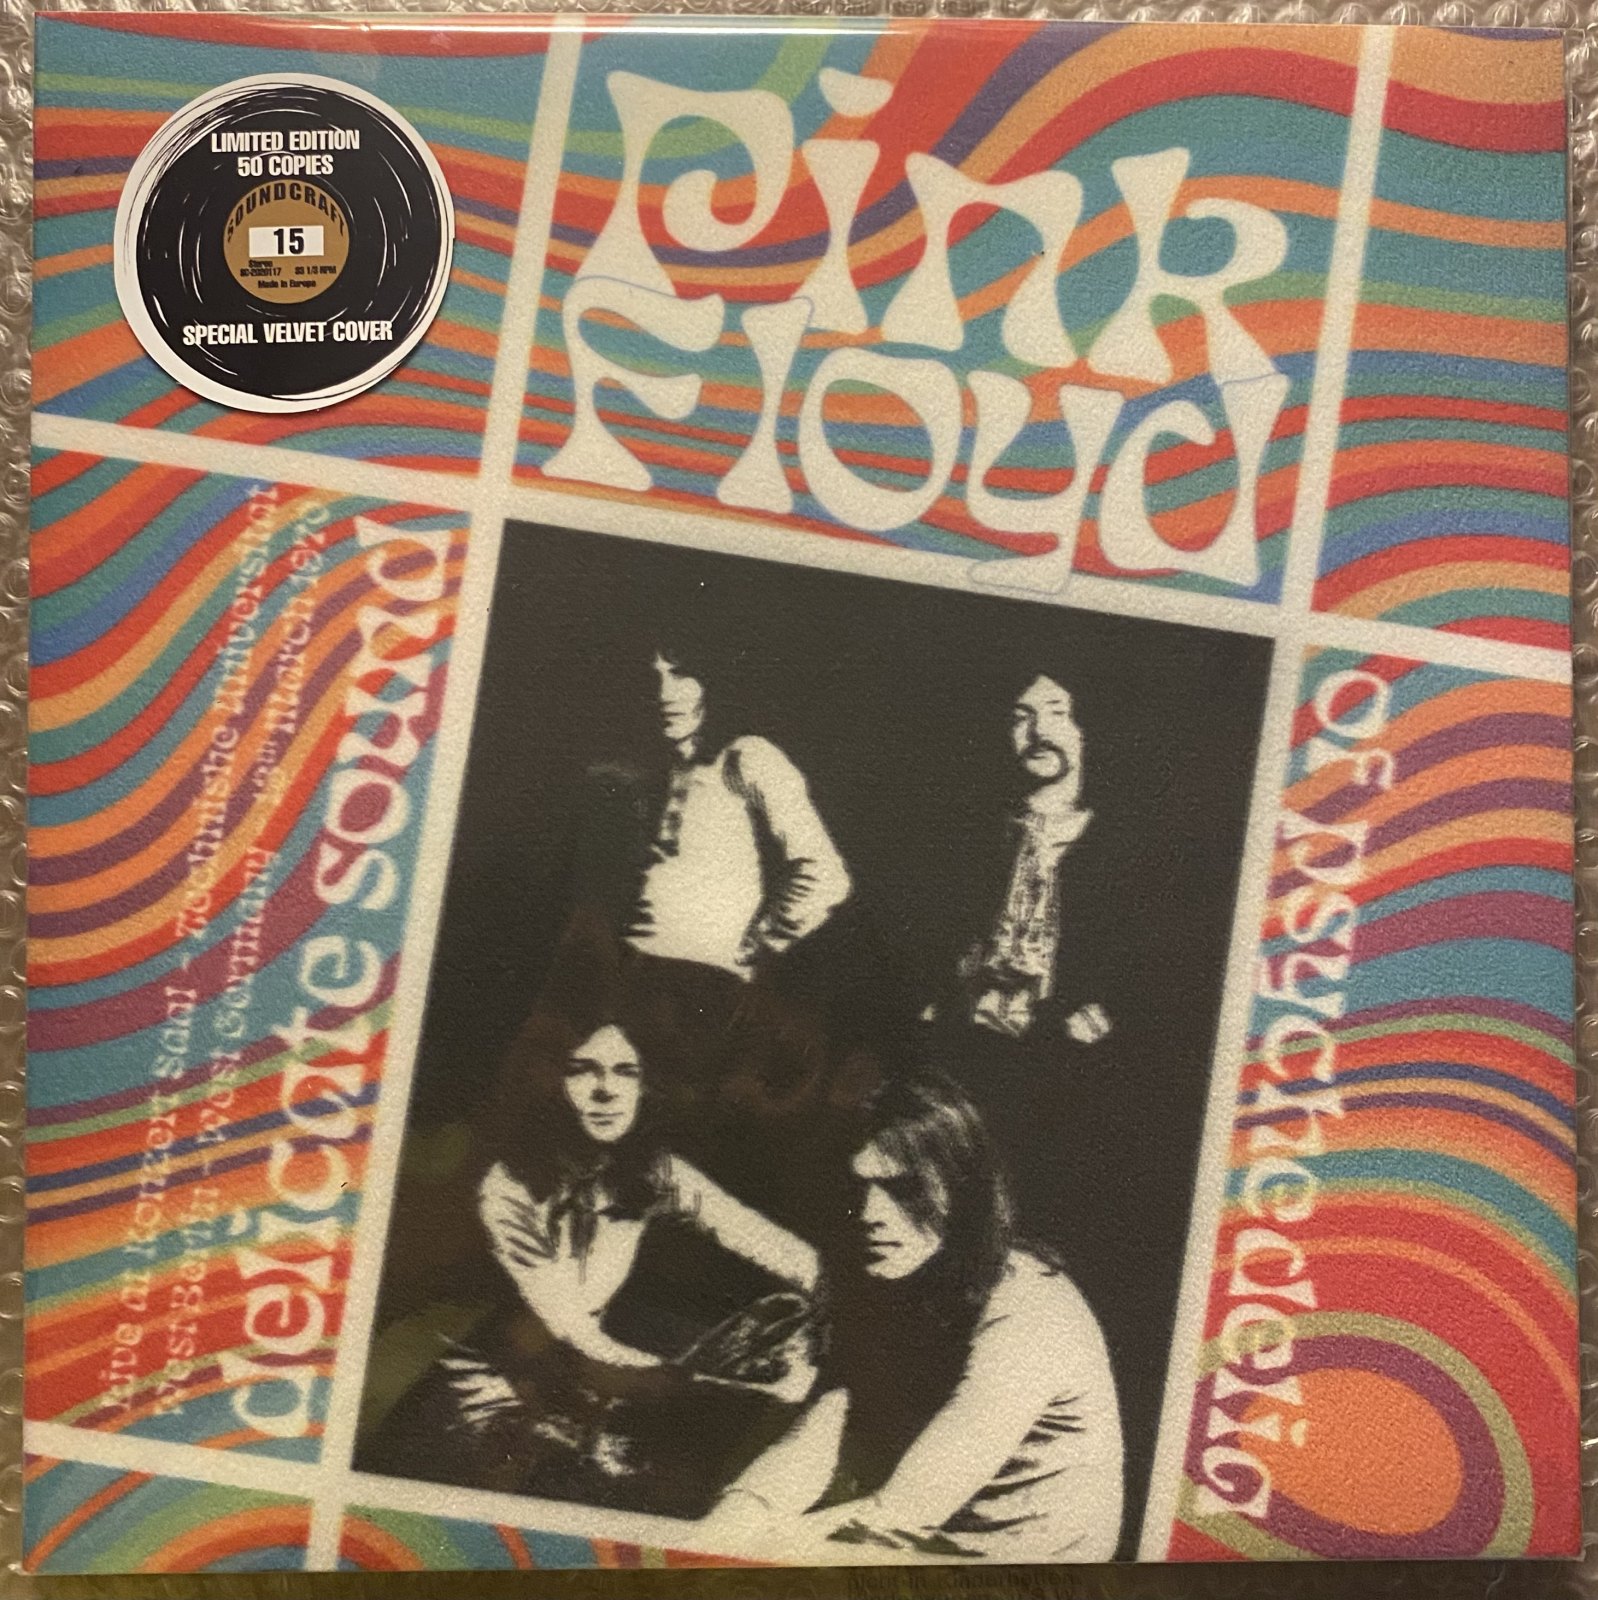 PINK FLOYD - DELICATE SOUND OF PSYCHEDELIA - ULTRA LIMITED GOLD VINYL